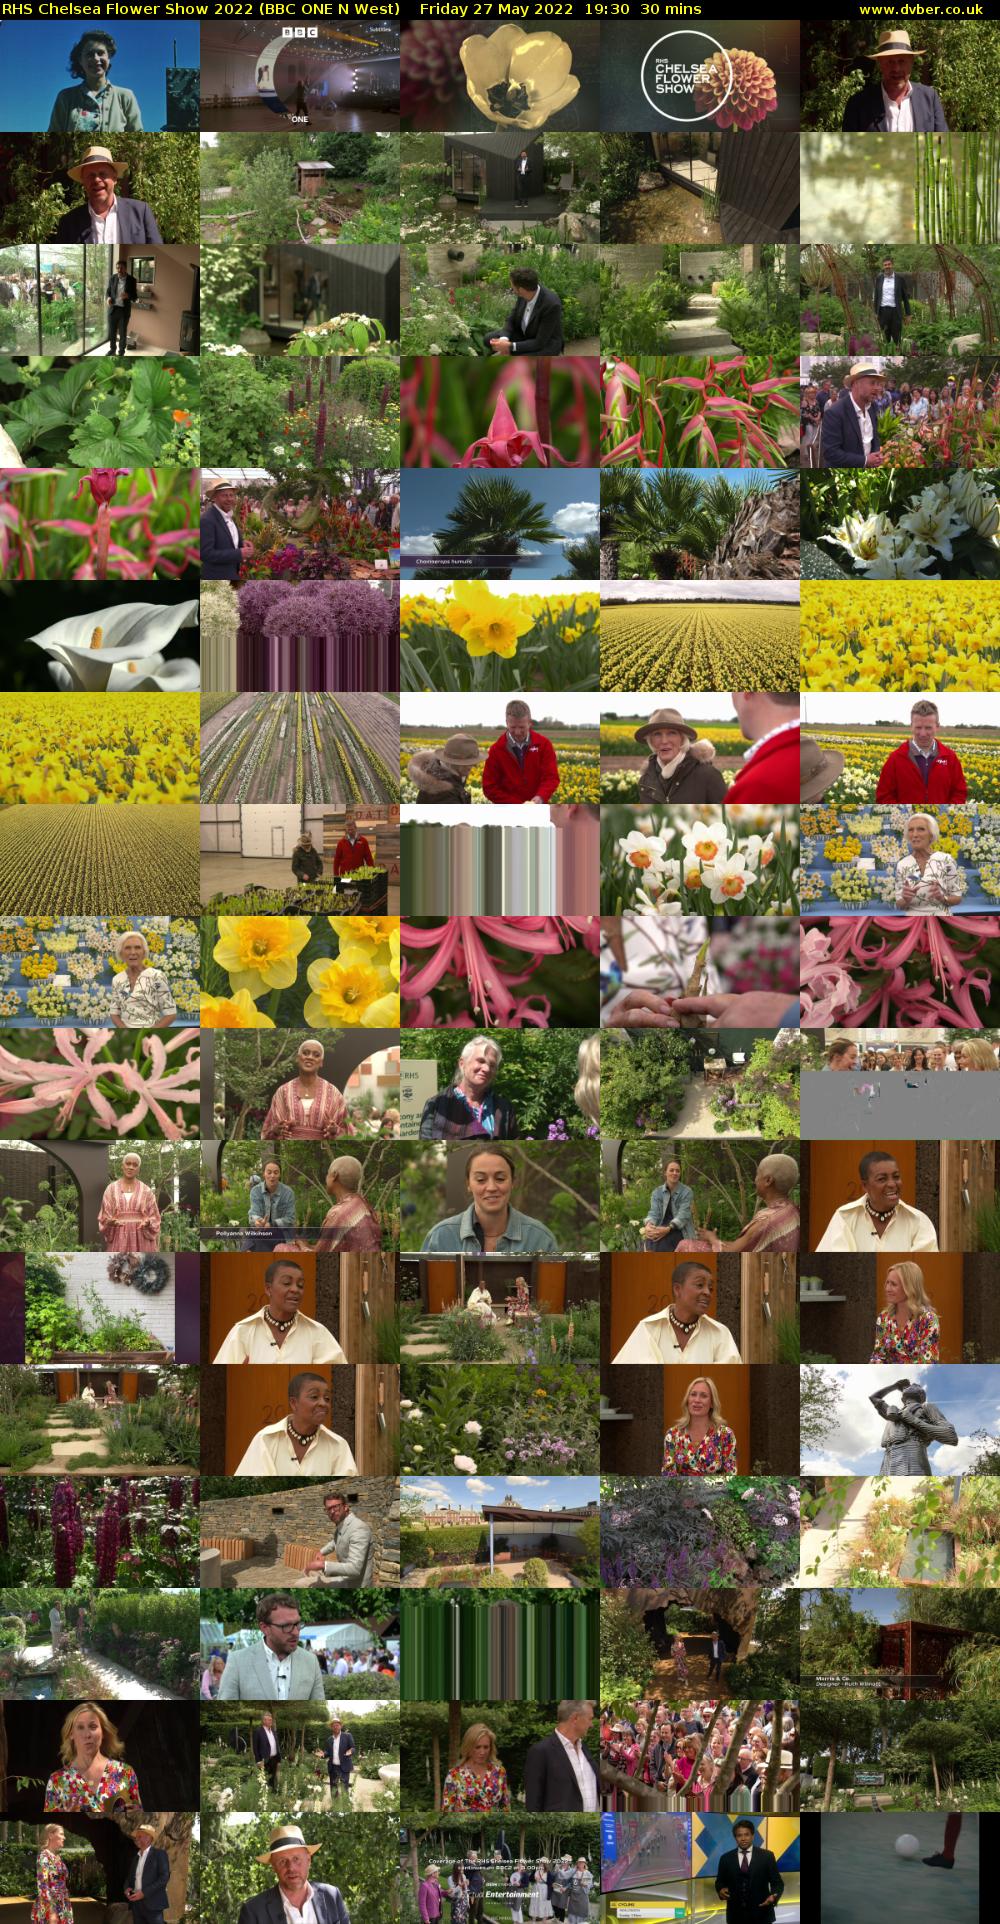 RHS Chelsea Flower Show 2022 (BBC ONE N West) Friday 27 May 2022 19:30 - 20:00